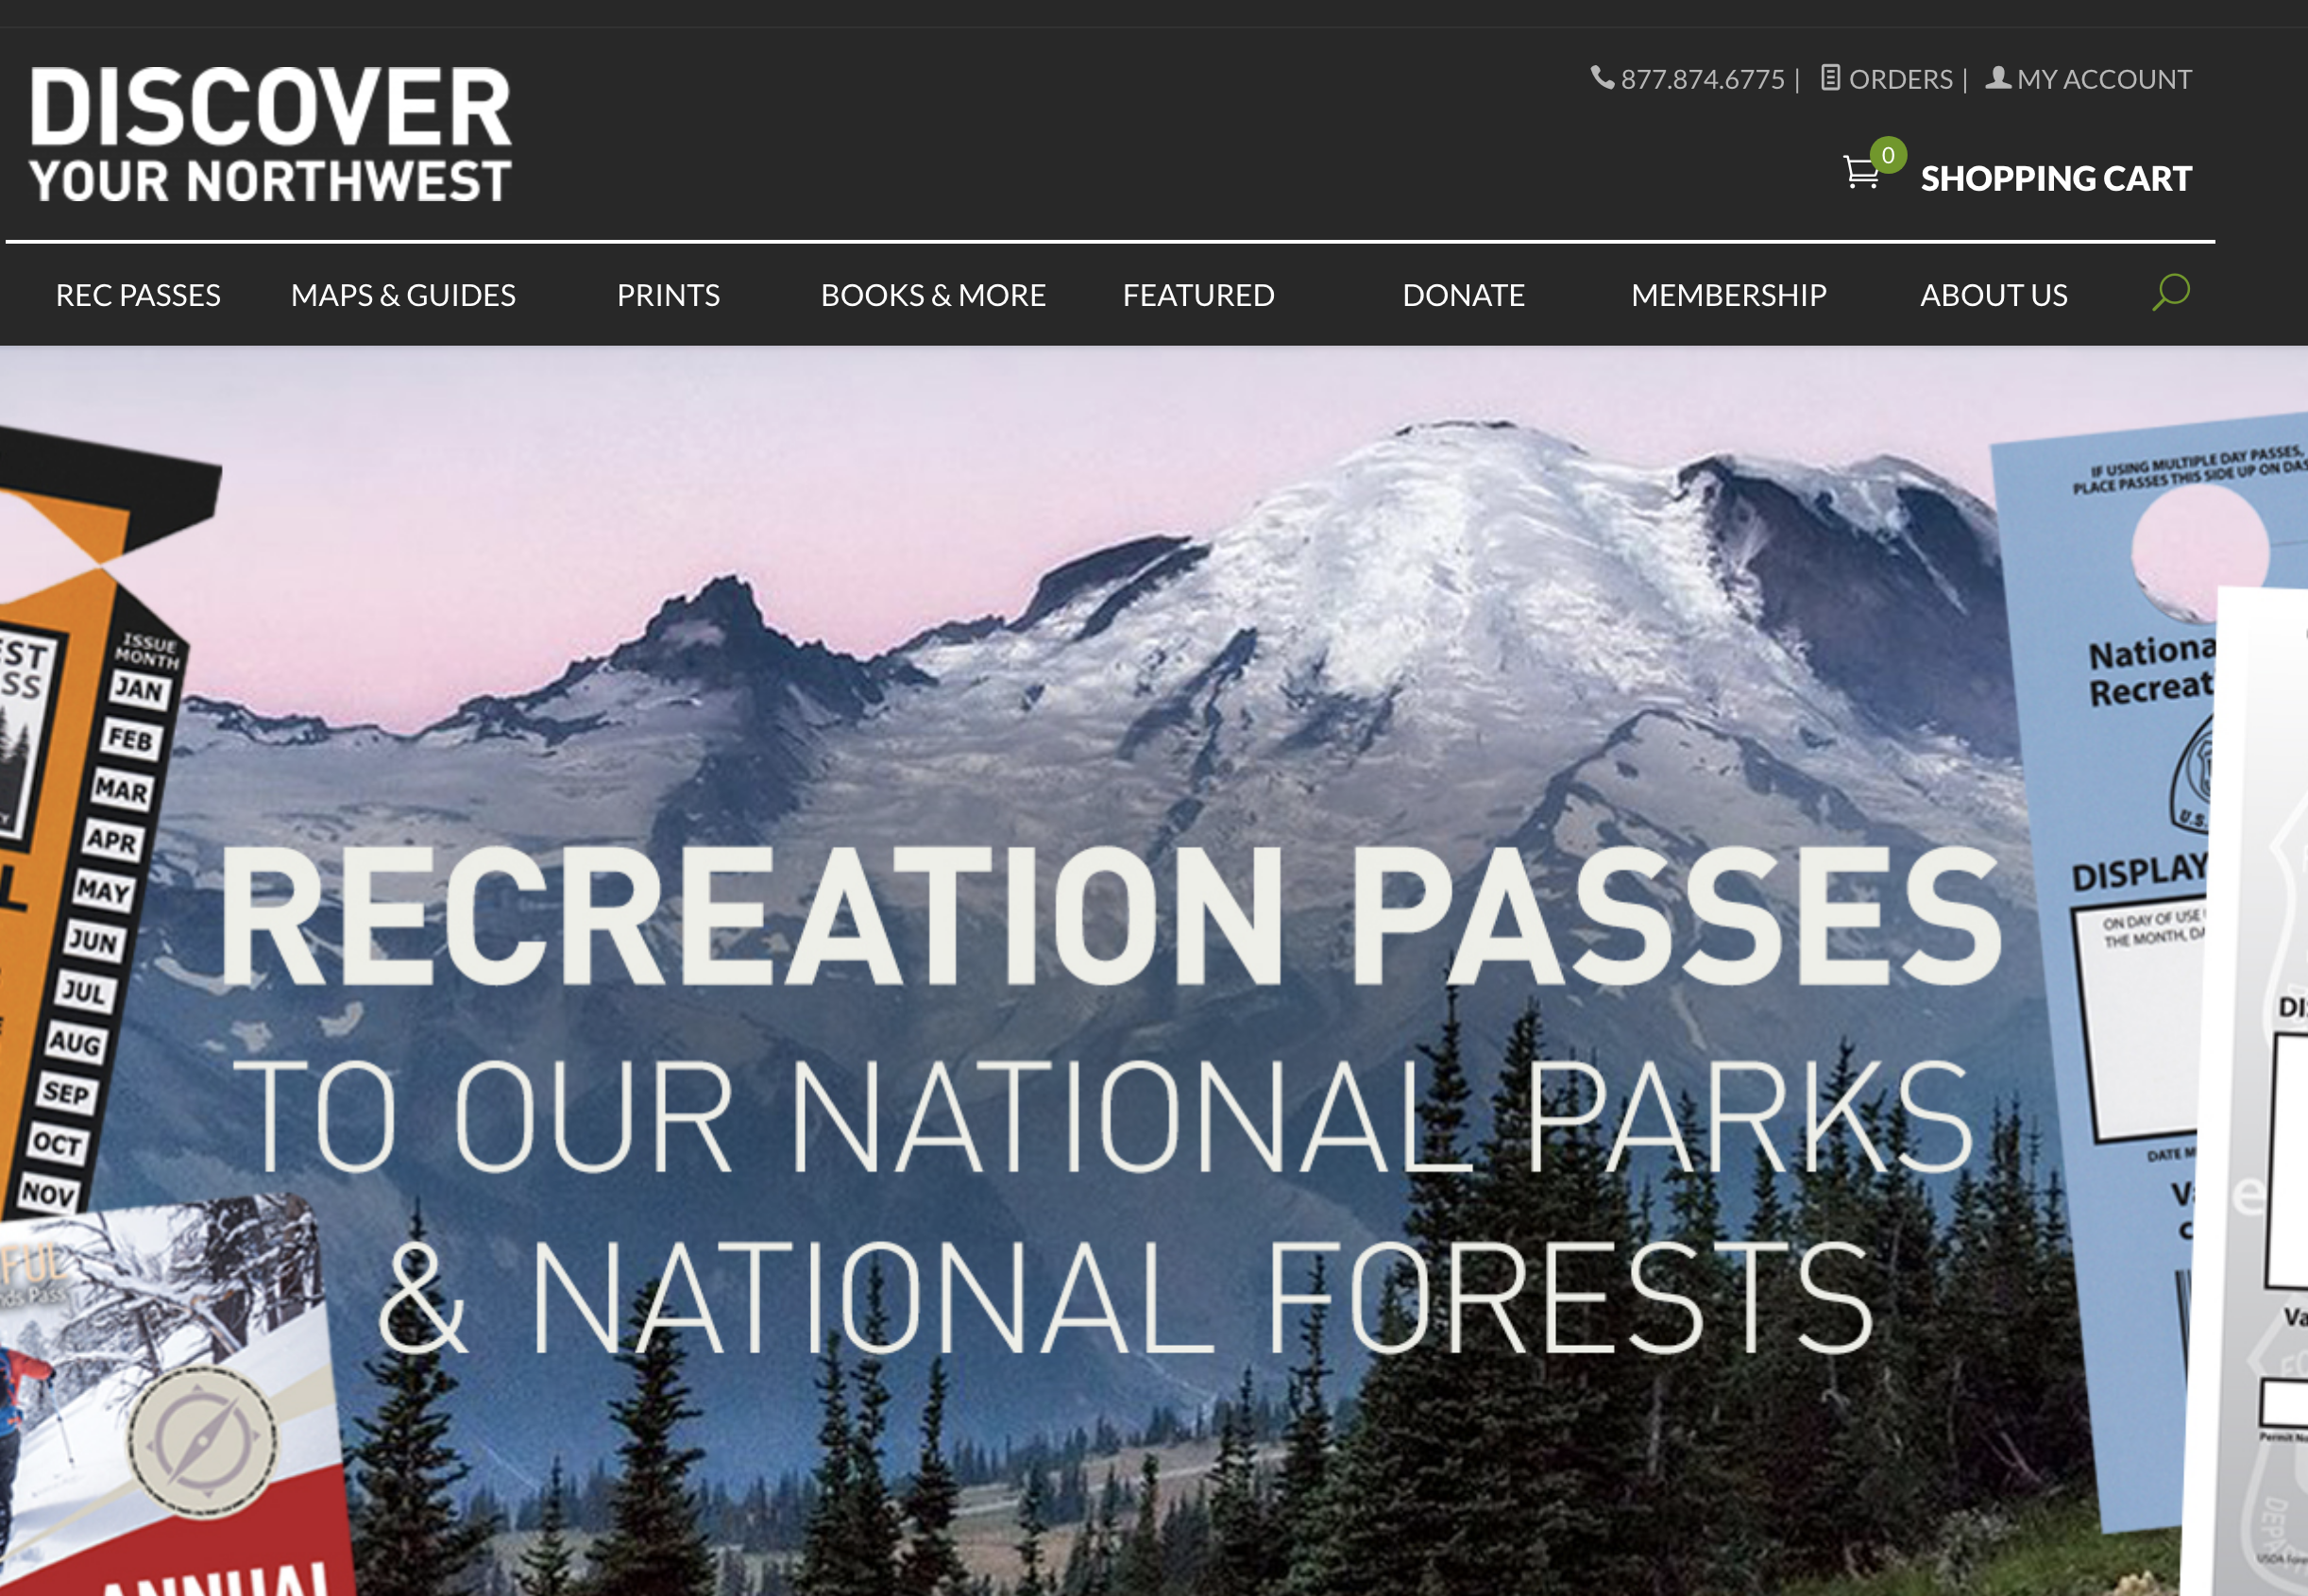 Discover Your Northwest